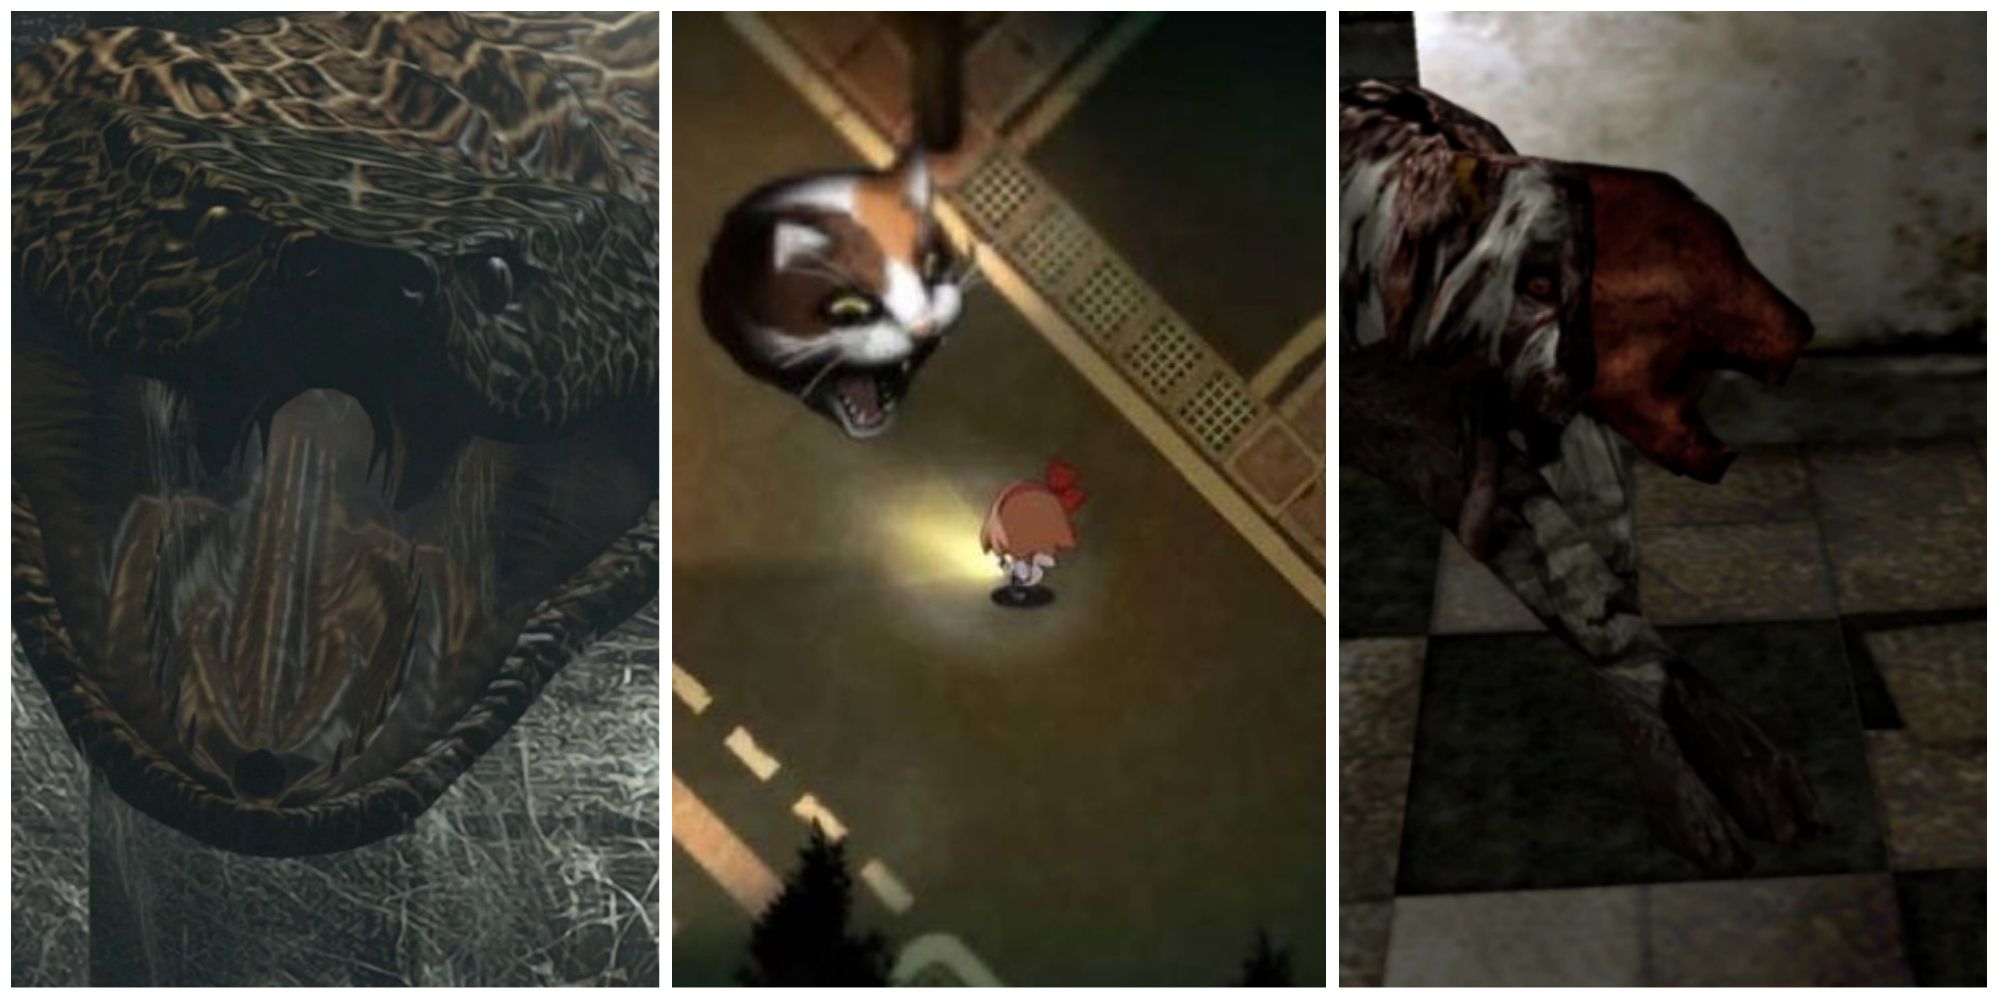 Split image screenshots of Yawn from Resident Evil, Monster Cat from Yomawari and Double Head from Silent Hill 3.